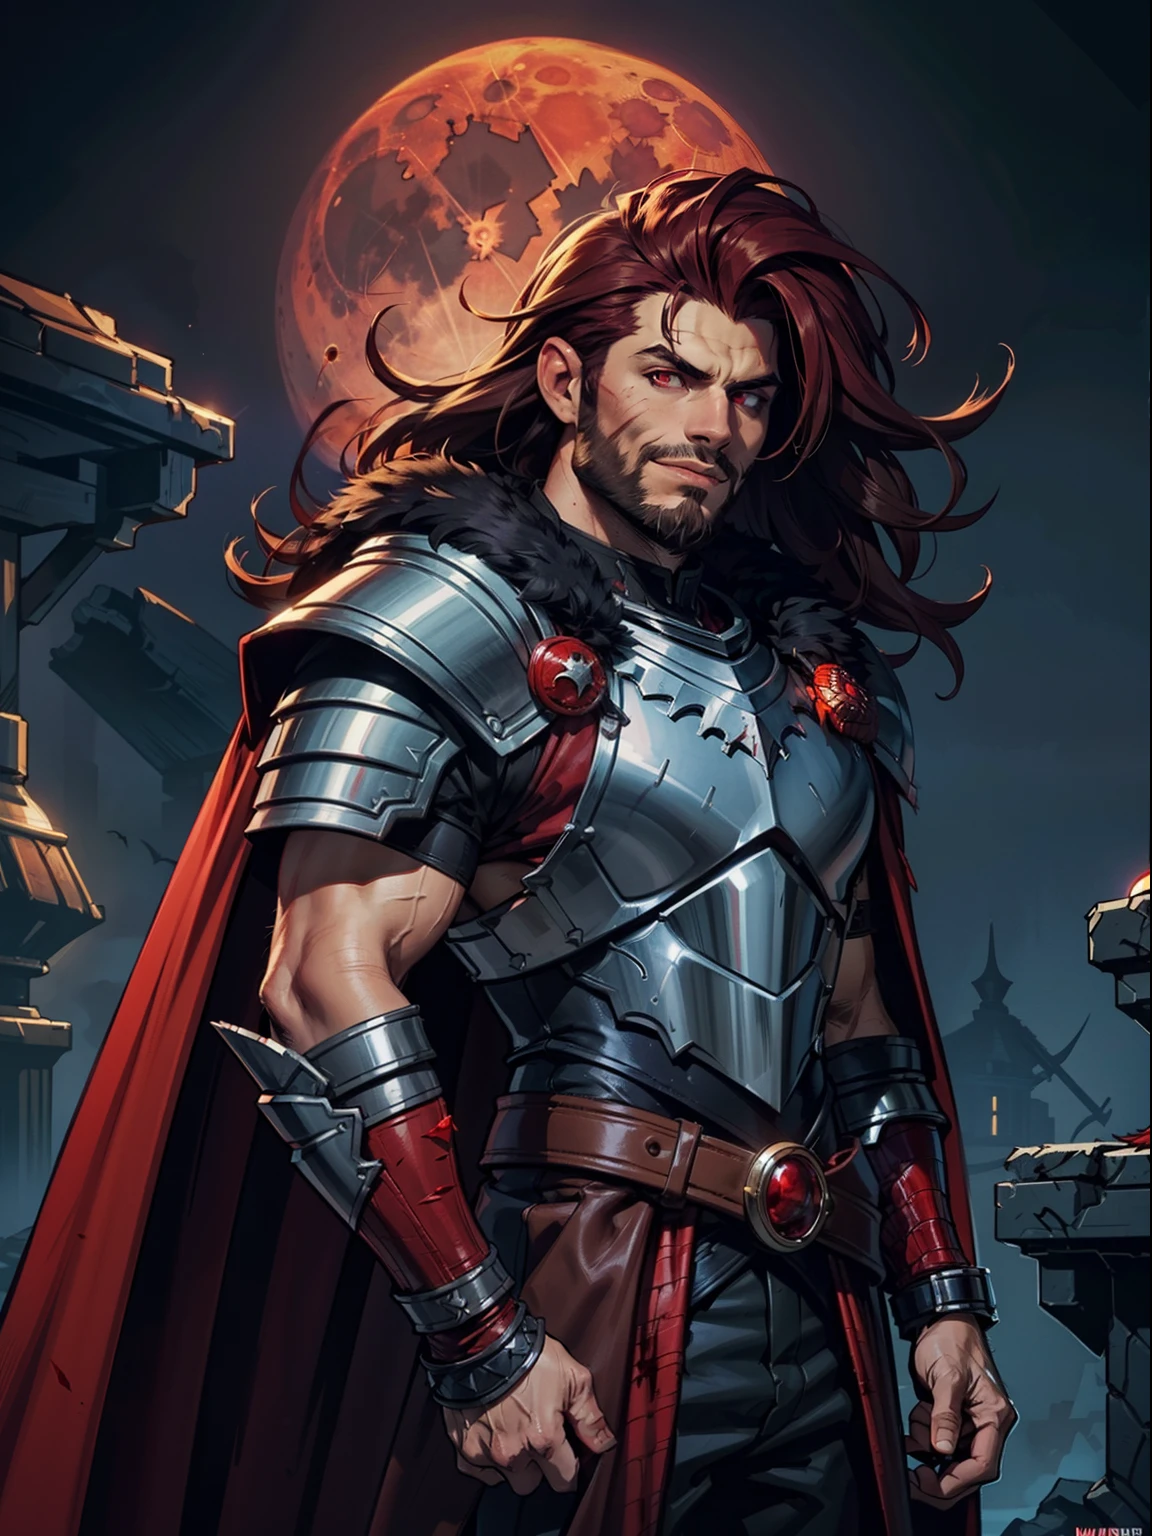 Dark night blood moon background, Darkest dungeon style, looking at the moon, game portrait, Sadurang from Marvel, hunk, wild mane hair, mullet, defined face, detailed eyes, short beard, glowing red eyes, dark hair, wily smile, badass, dangerous, wearing armor set of red dragon scales, cape of furs